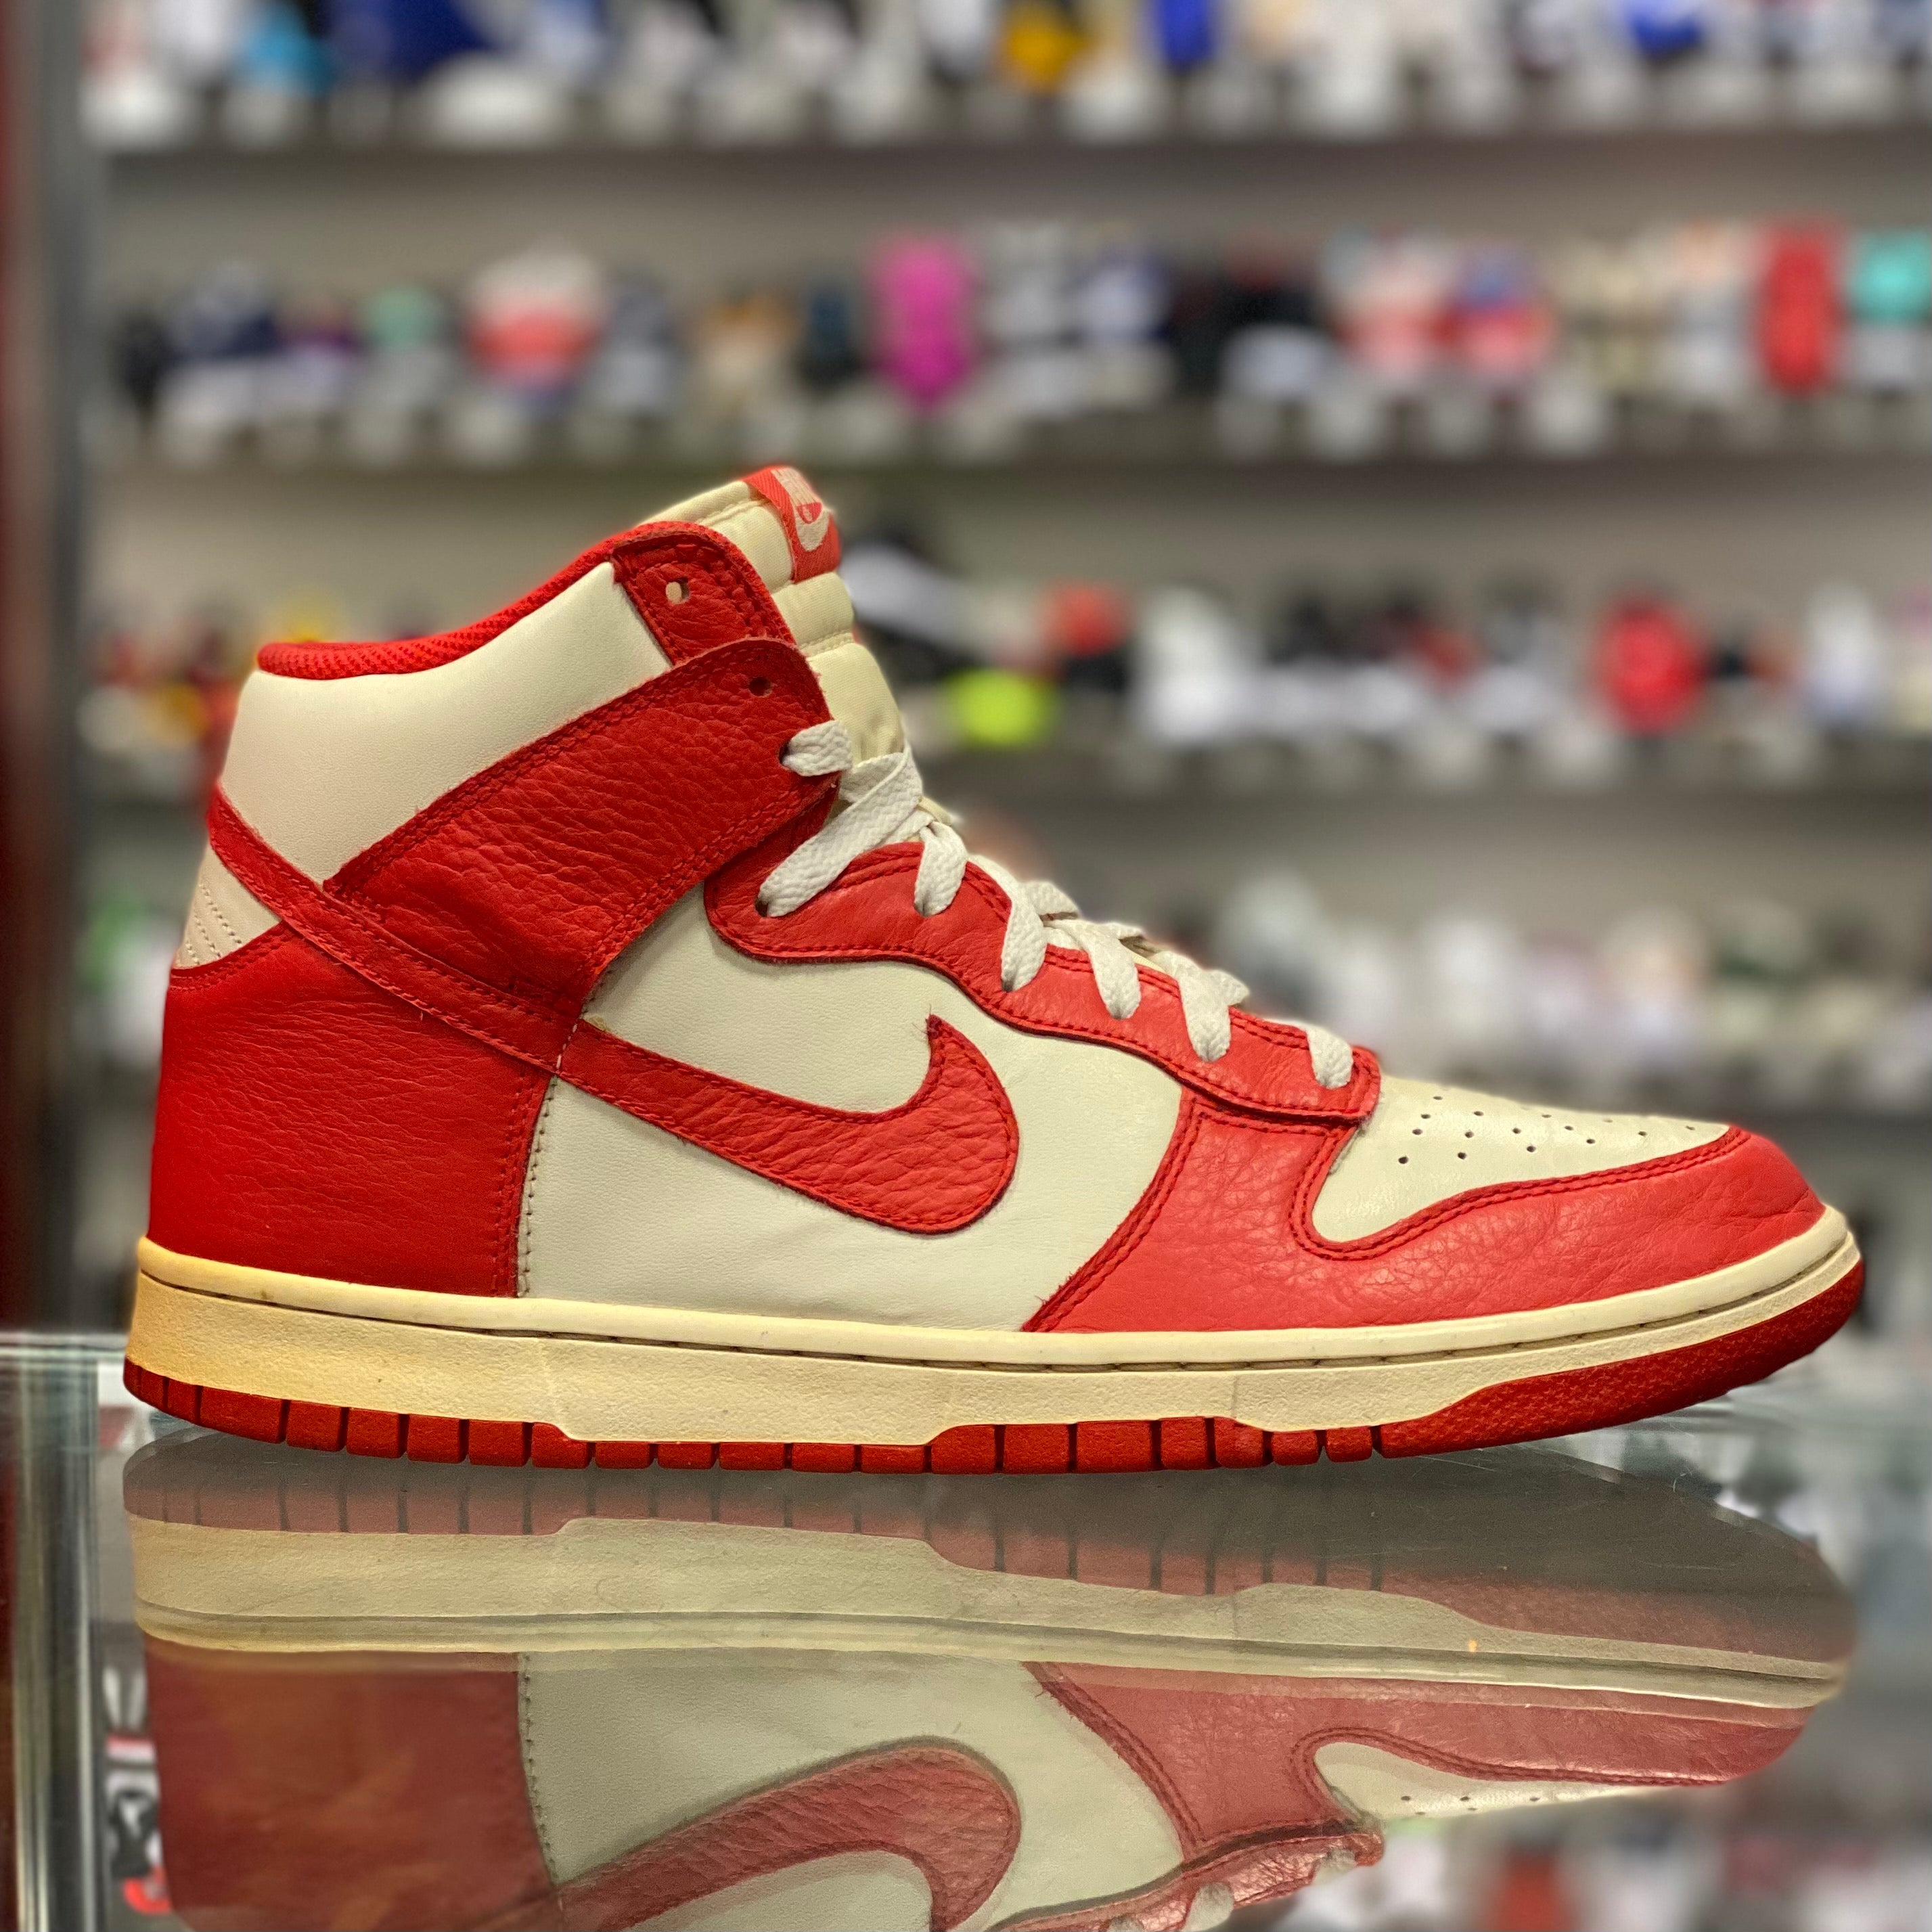 Nike Dunk High College Pack “Sail Action Red”